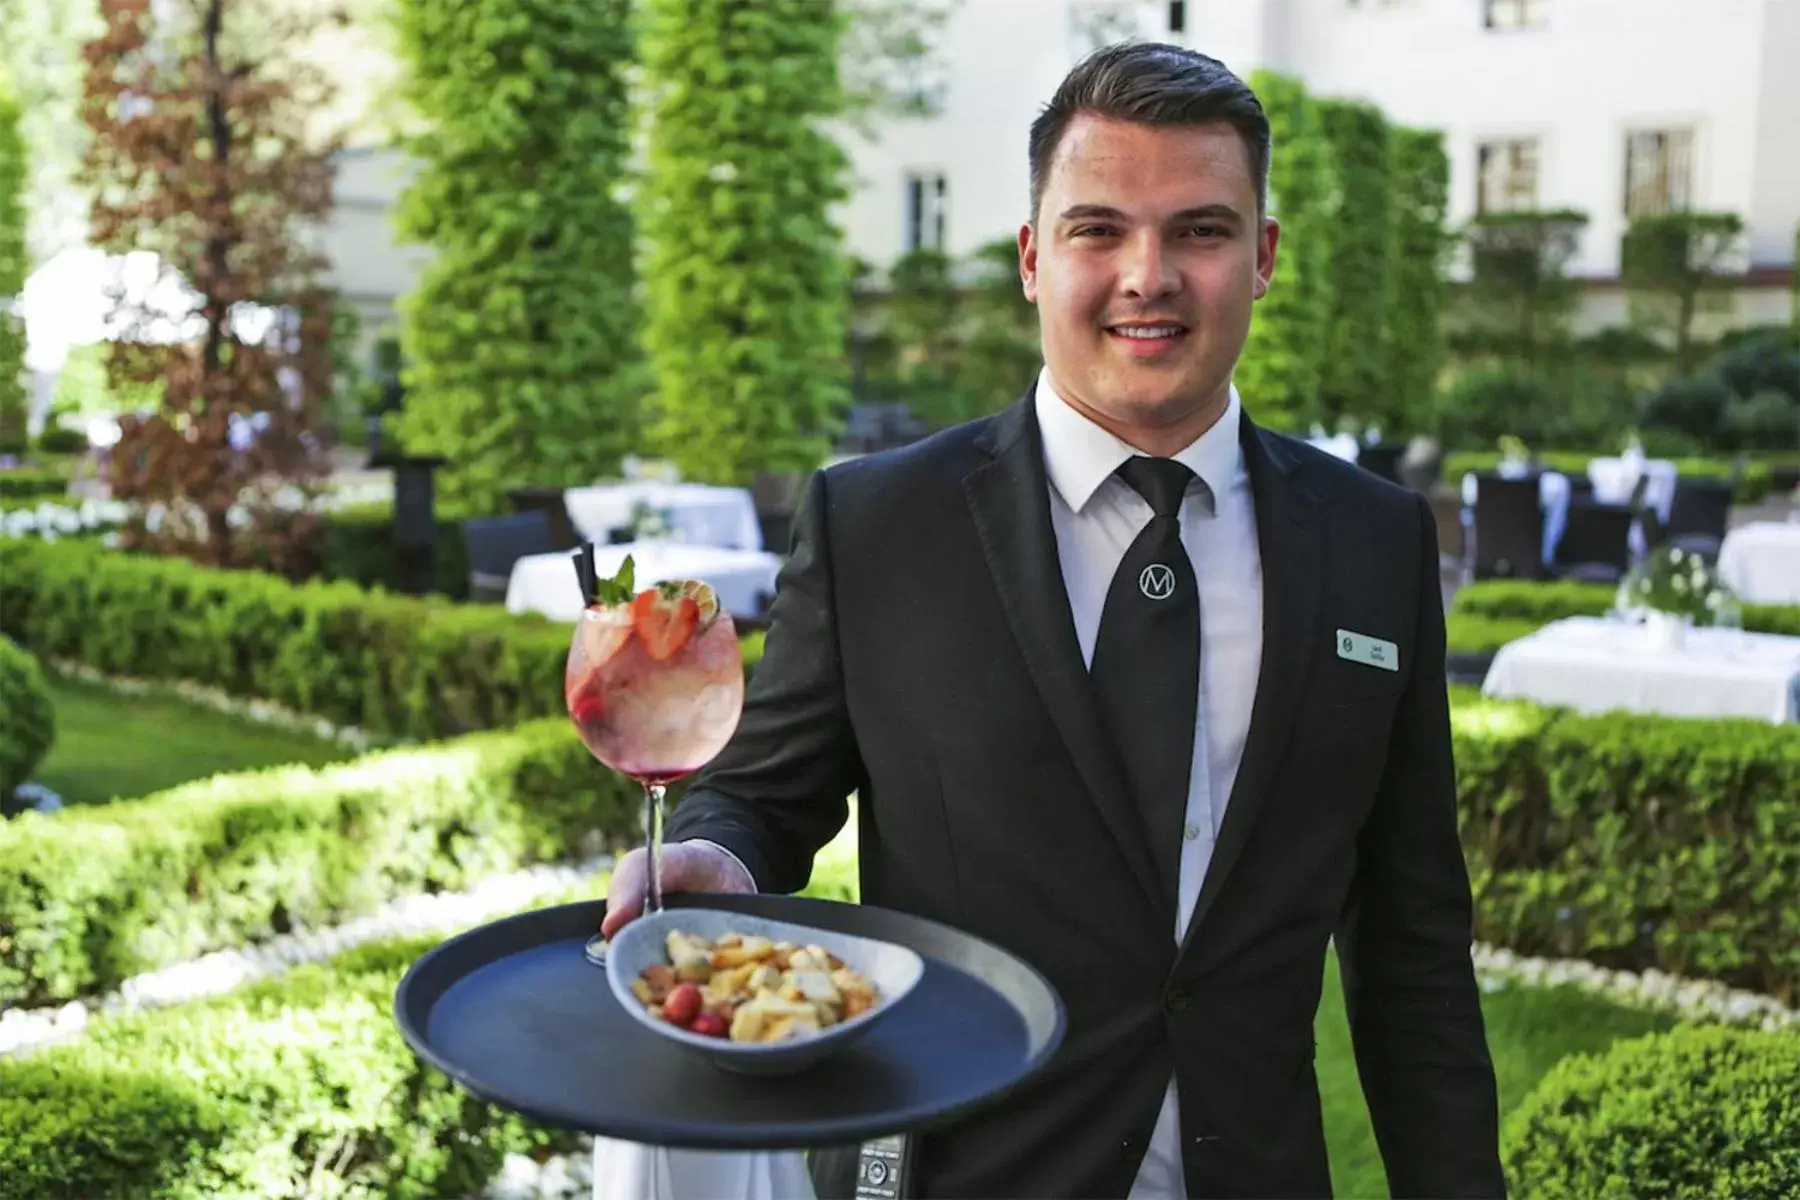 Staff in The Grand Mark Prague - The Leading Hotels of the World